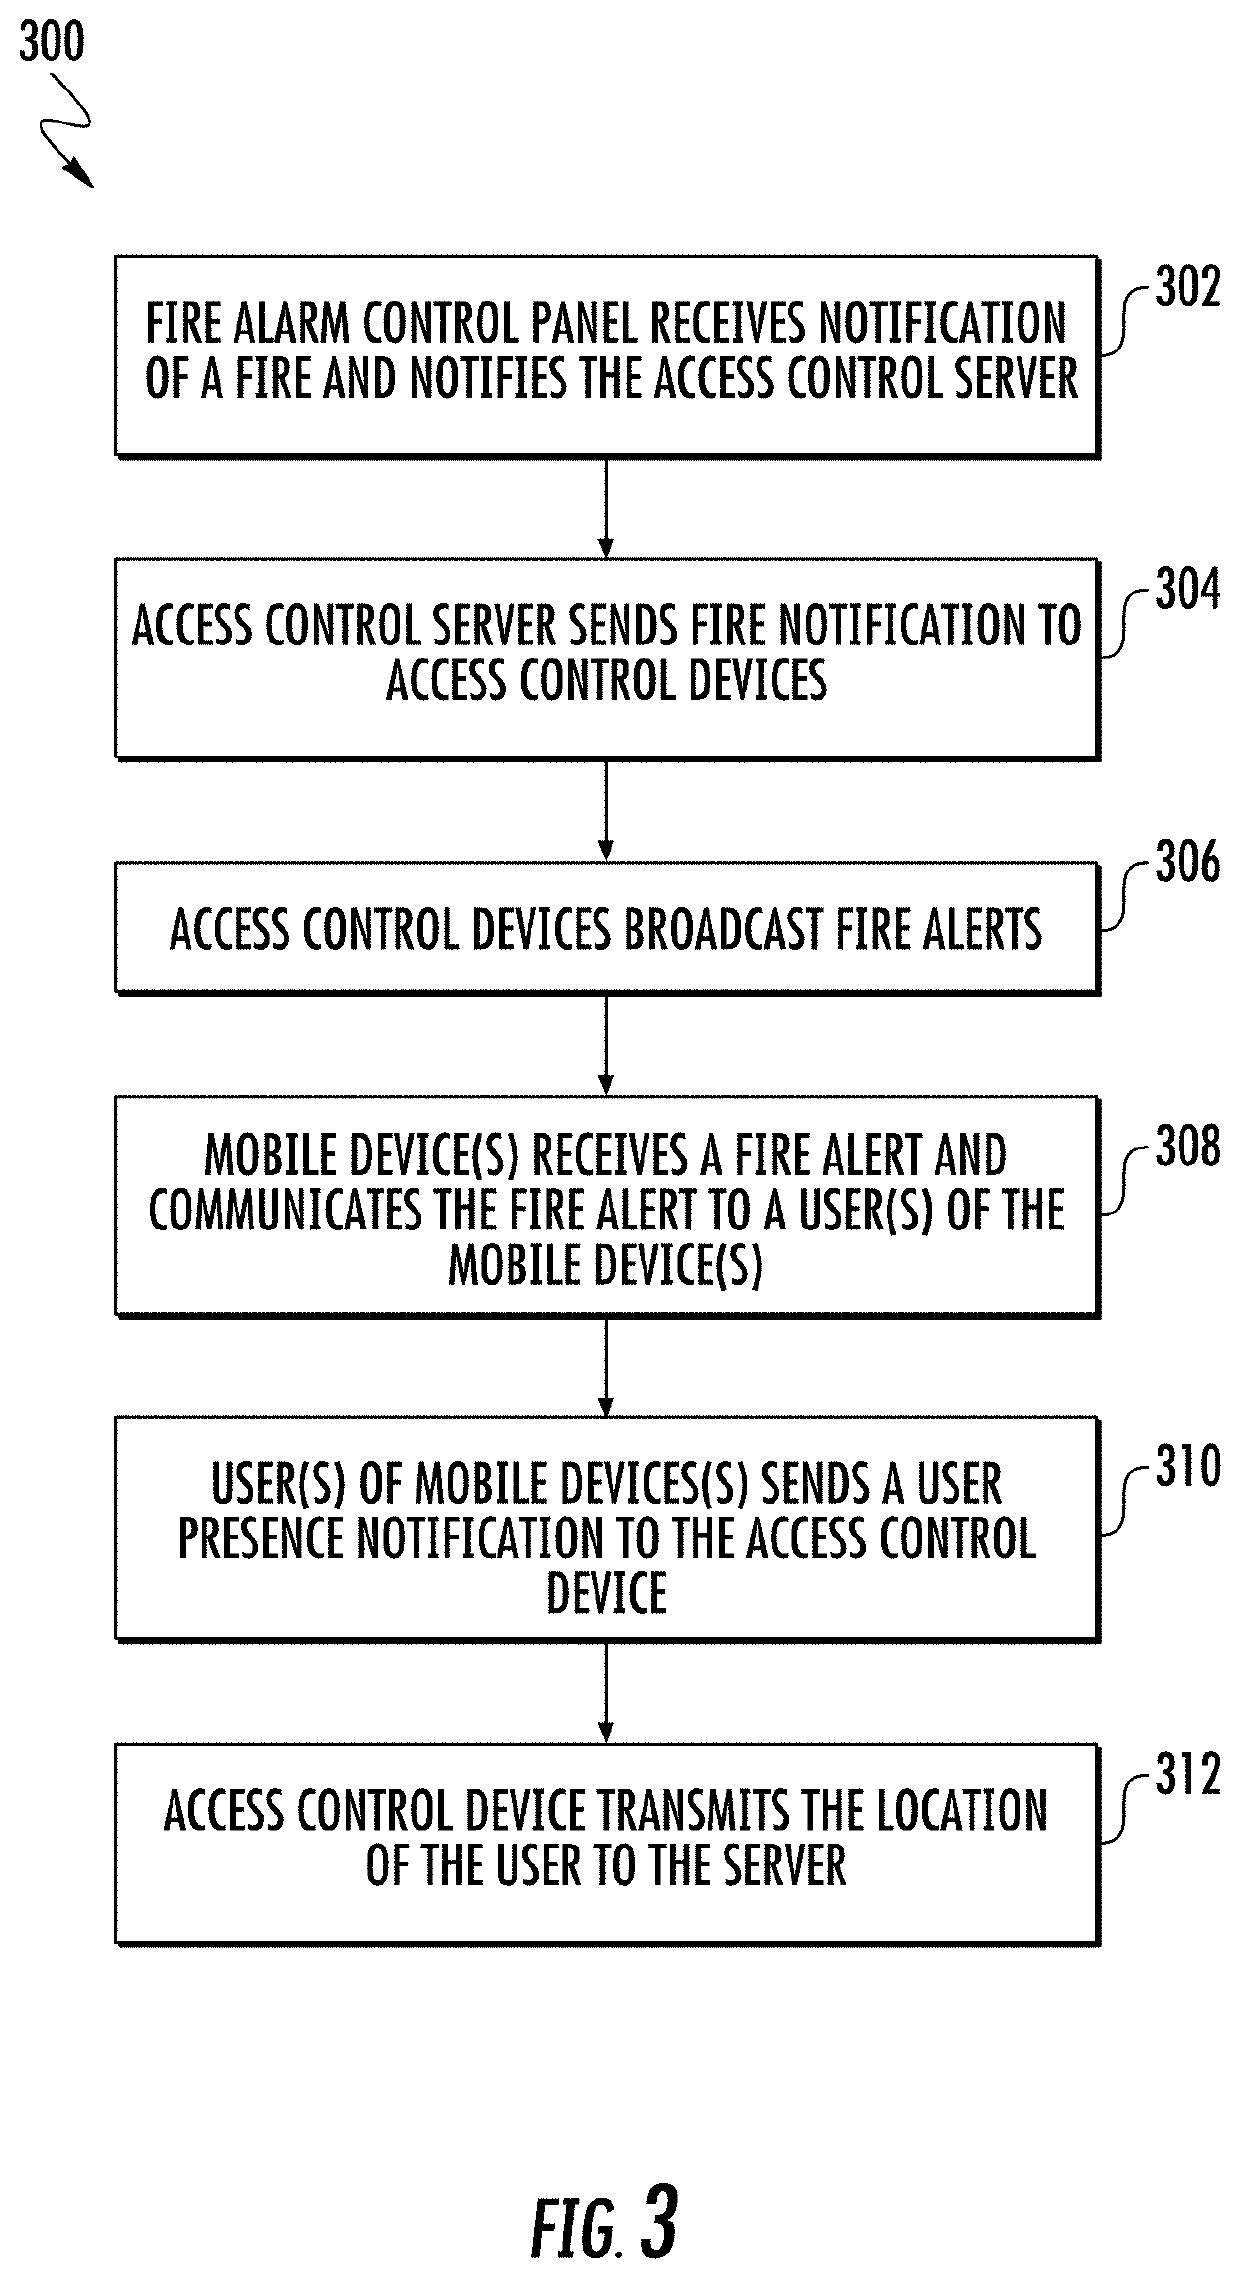 Using access control devices to send event notifications and to detect user presence